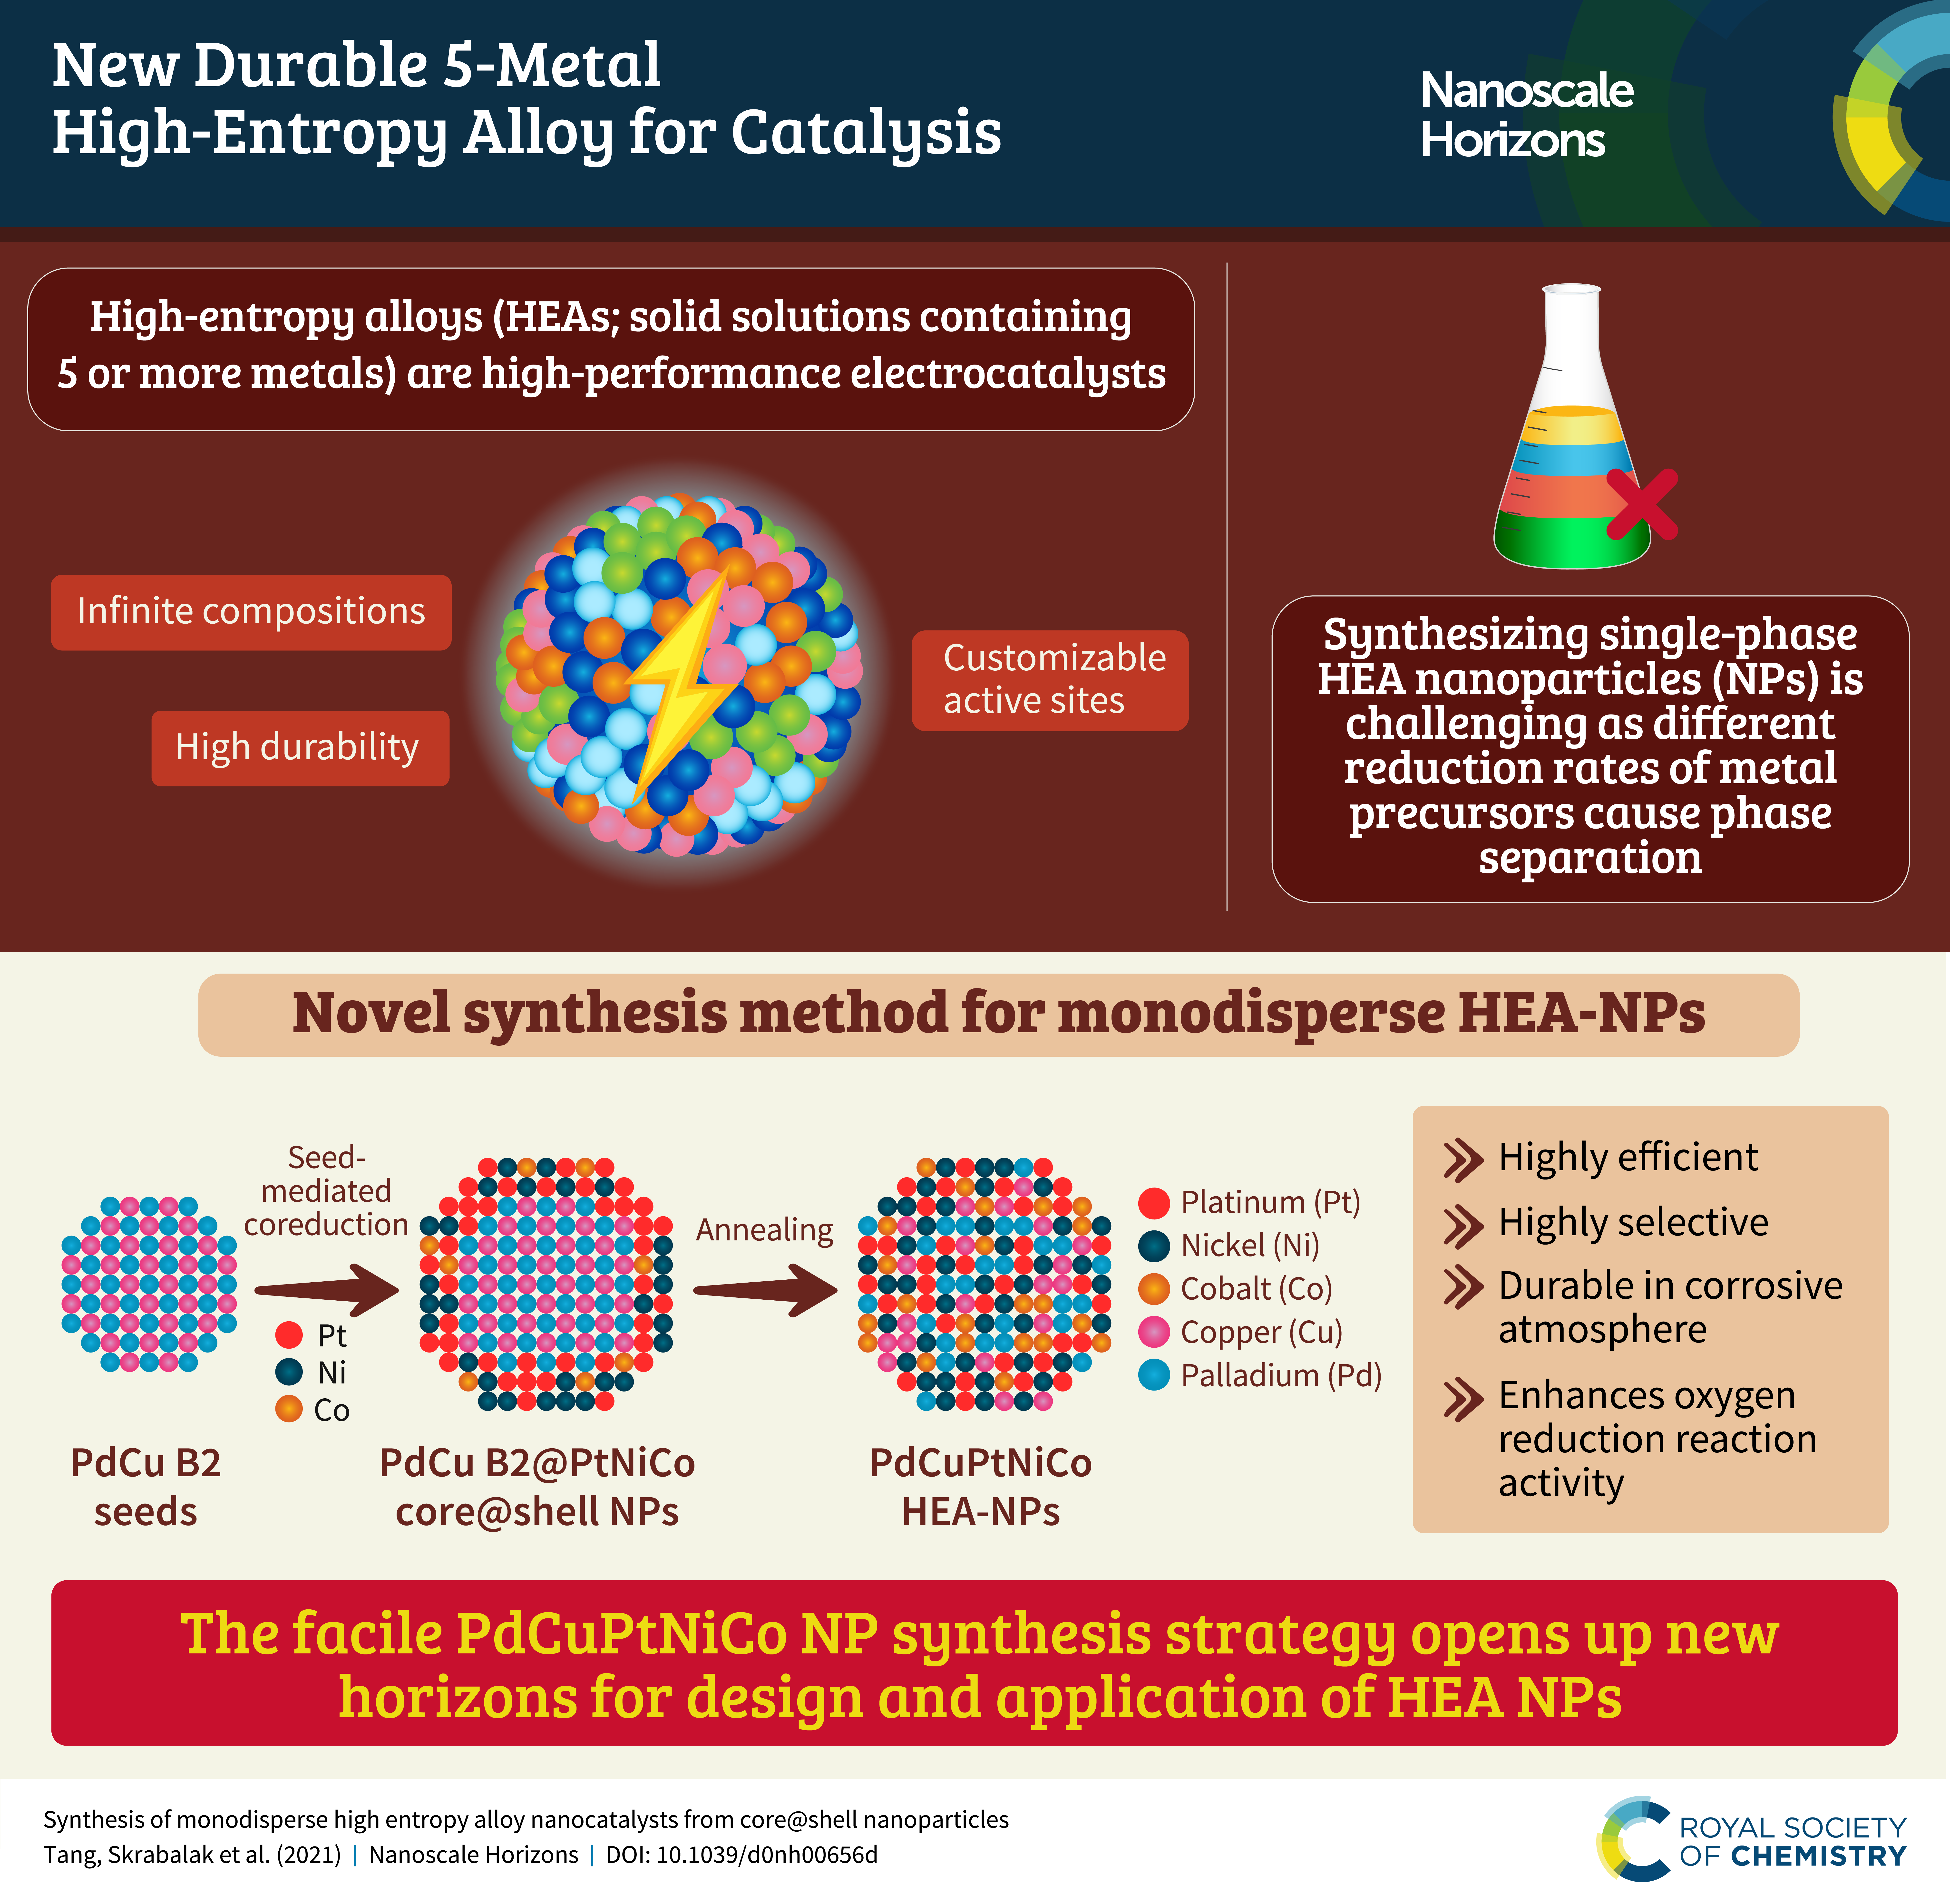 An infographic summarising the content of the article “Synthesis of monodisperse high entropy alloy nanocatalysts from core@shell nanoparticles"